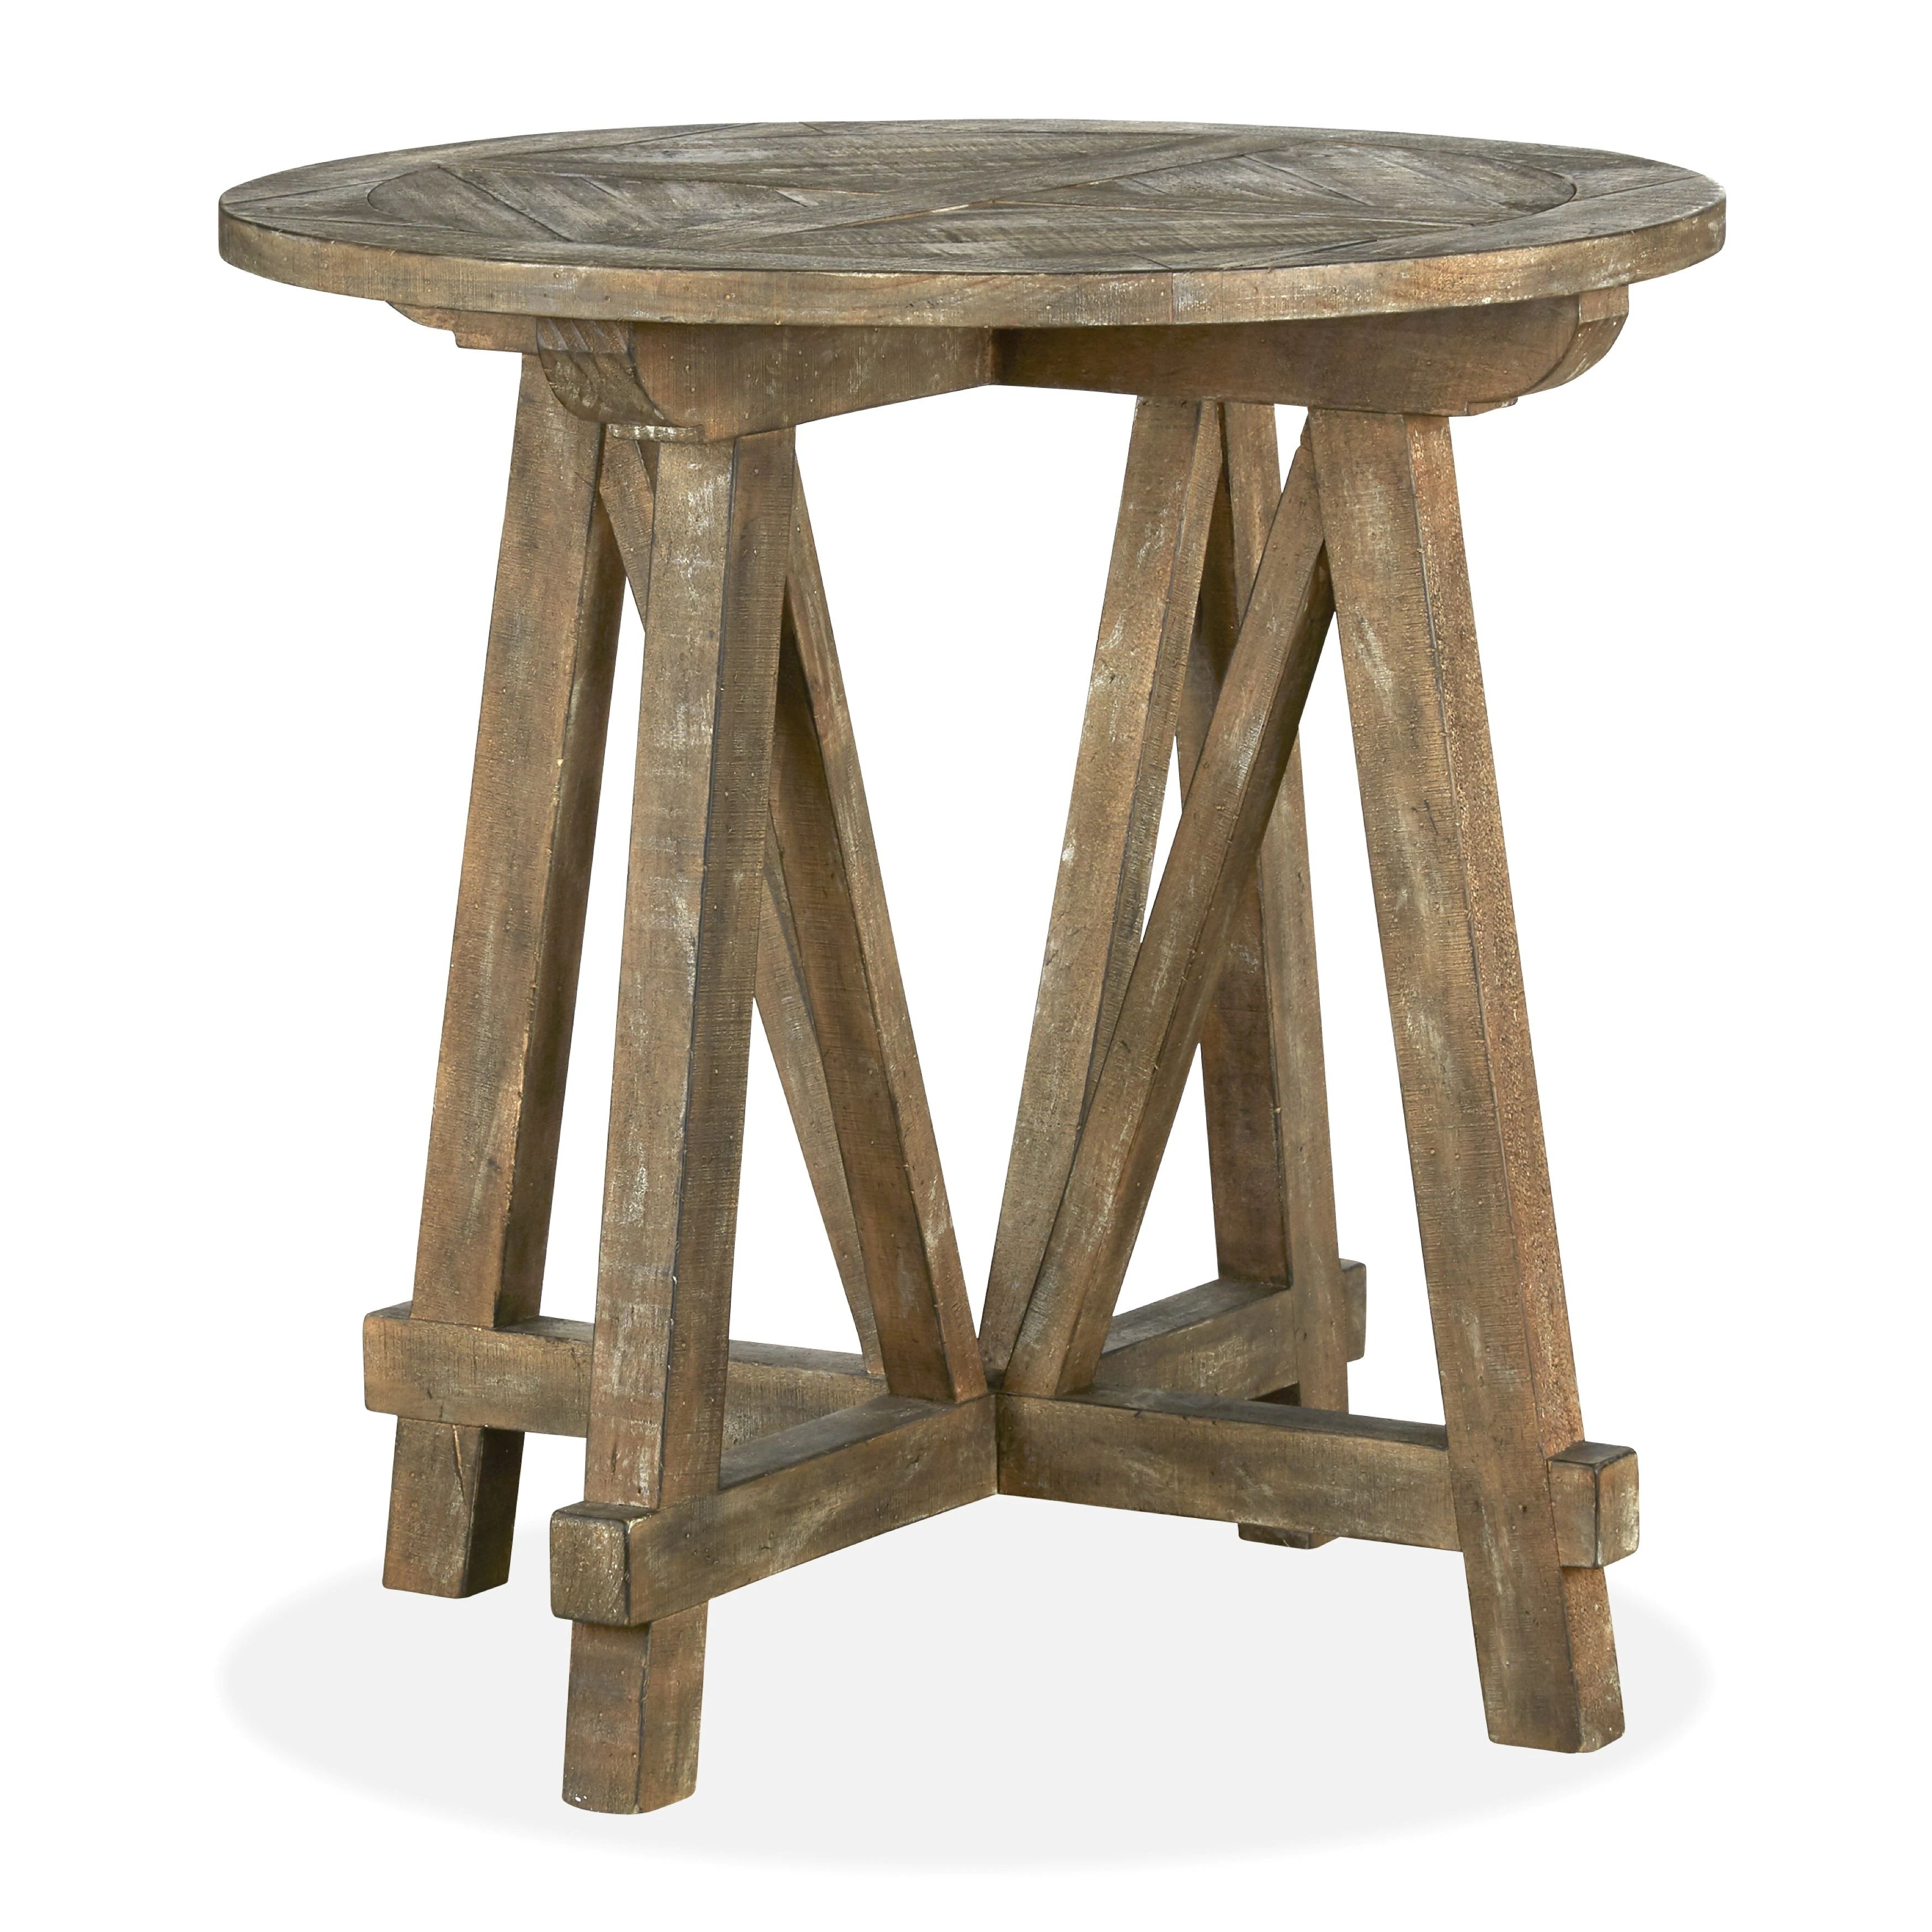 bluff heights rustic weathered nutmeg round accent table free shipping today oval fall tablecloths painted cabinets cover ideas living spaces furniture small narrow end ceramic